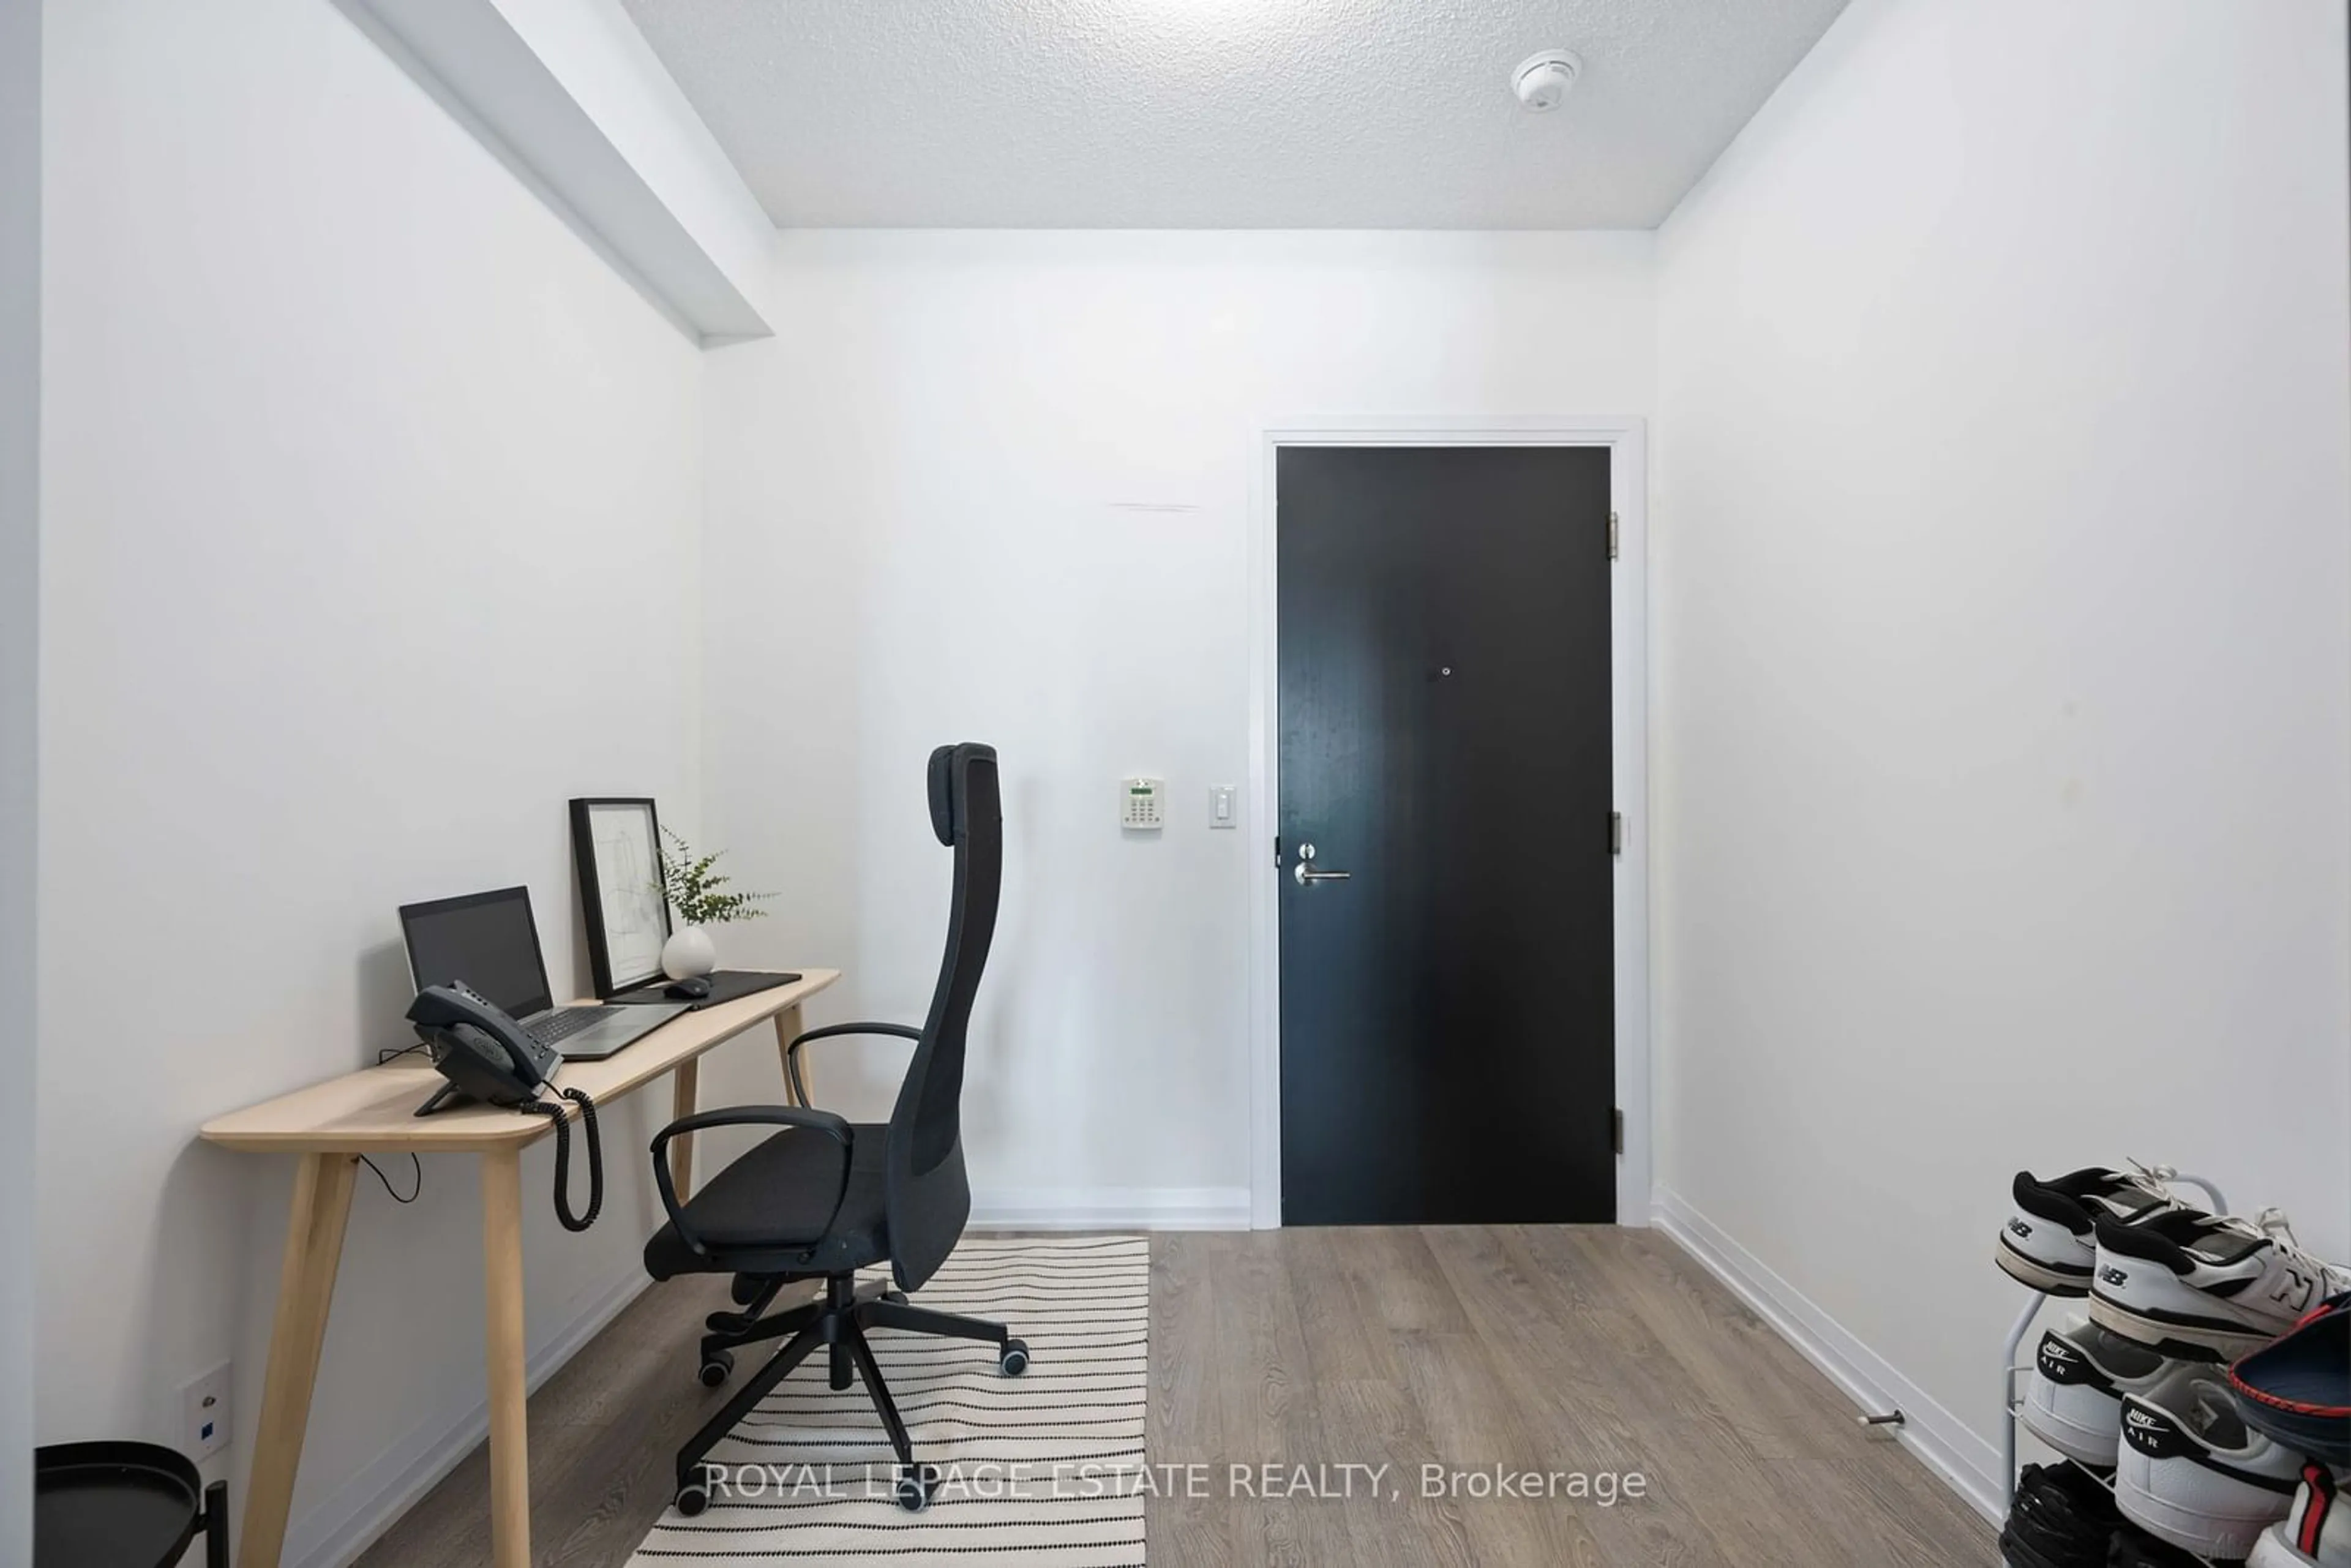 Other indoor space for 101 Erskine Ave #712, Toronto Ontario M4P 1Y5